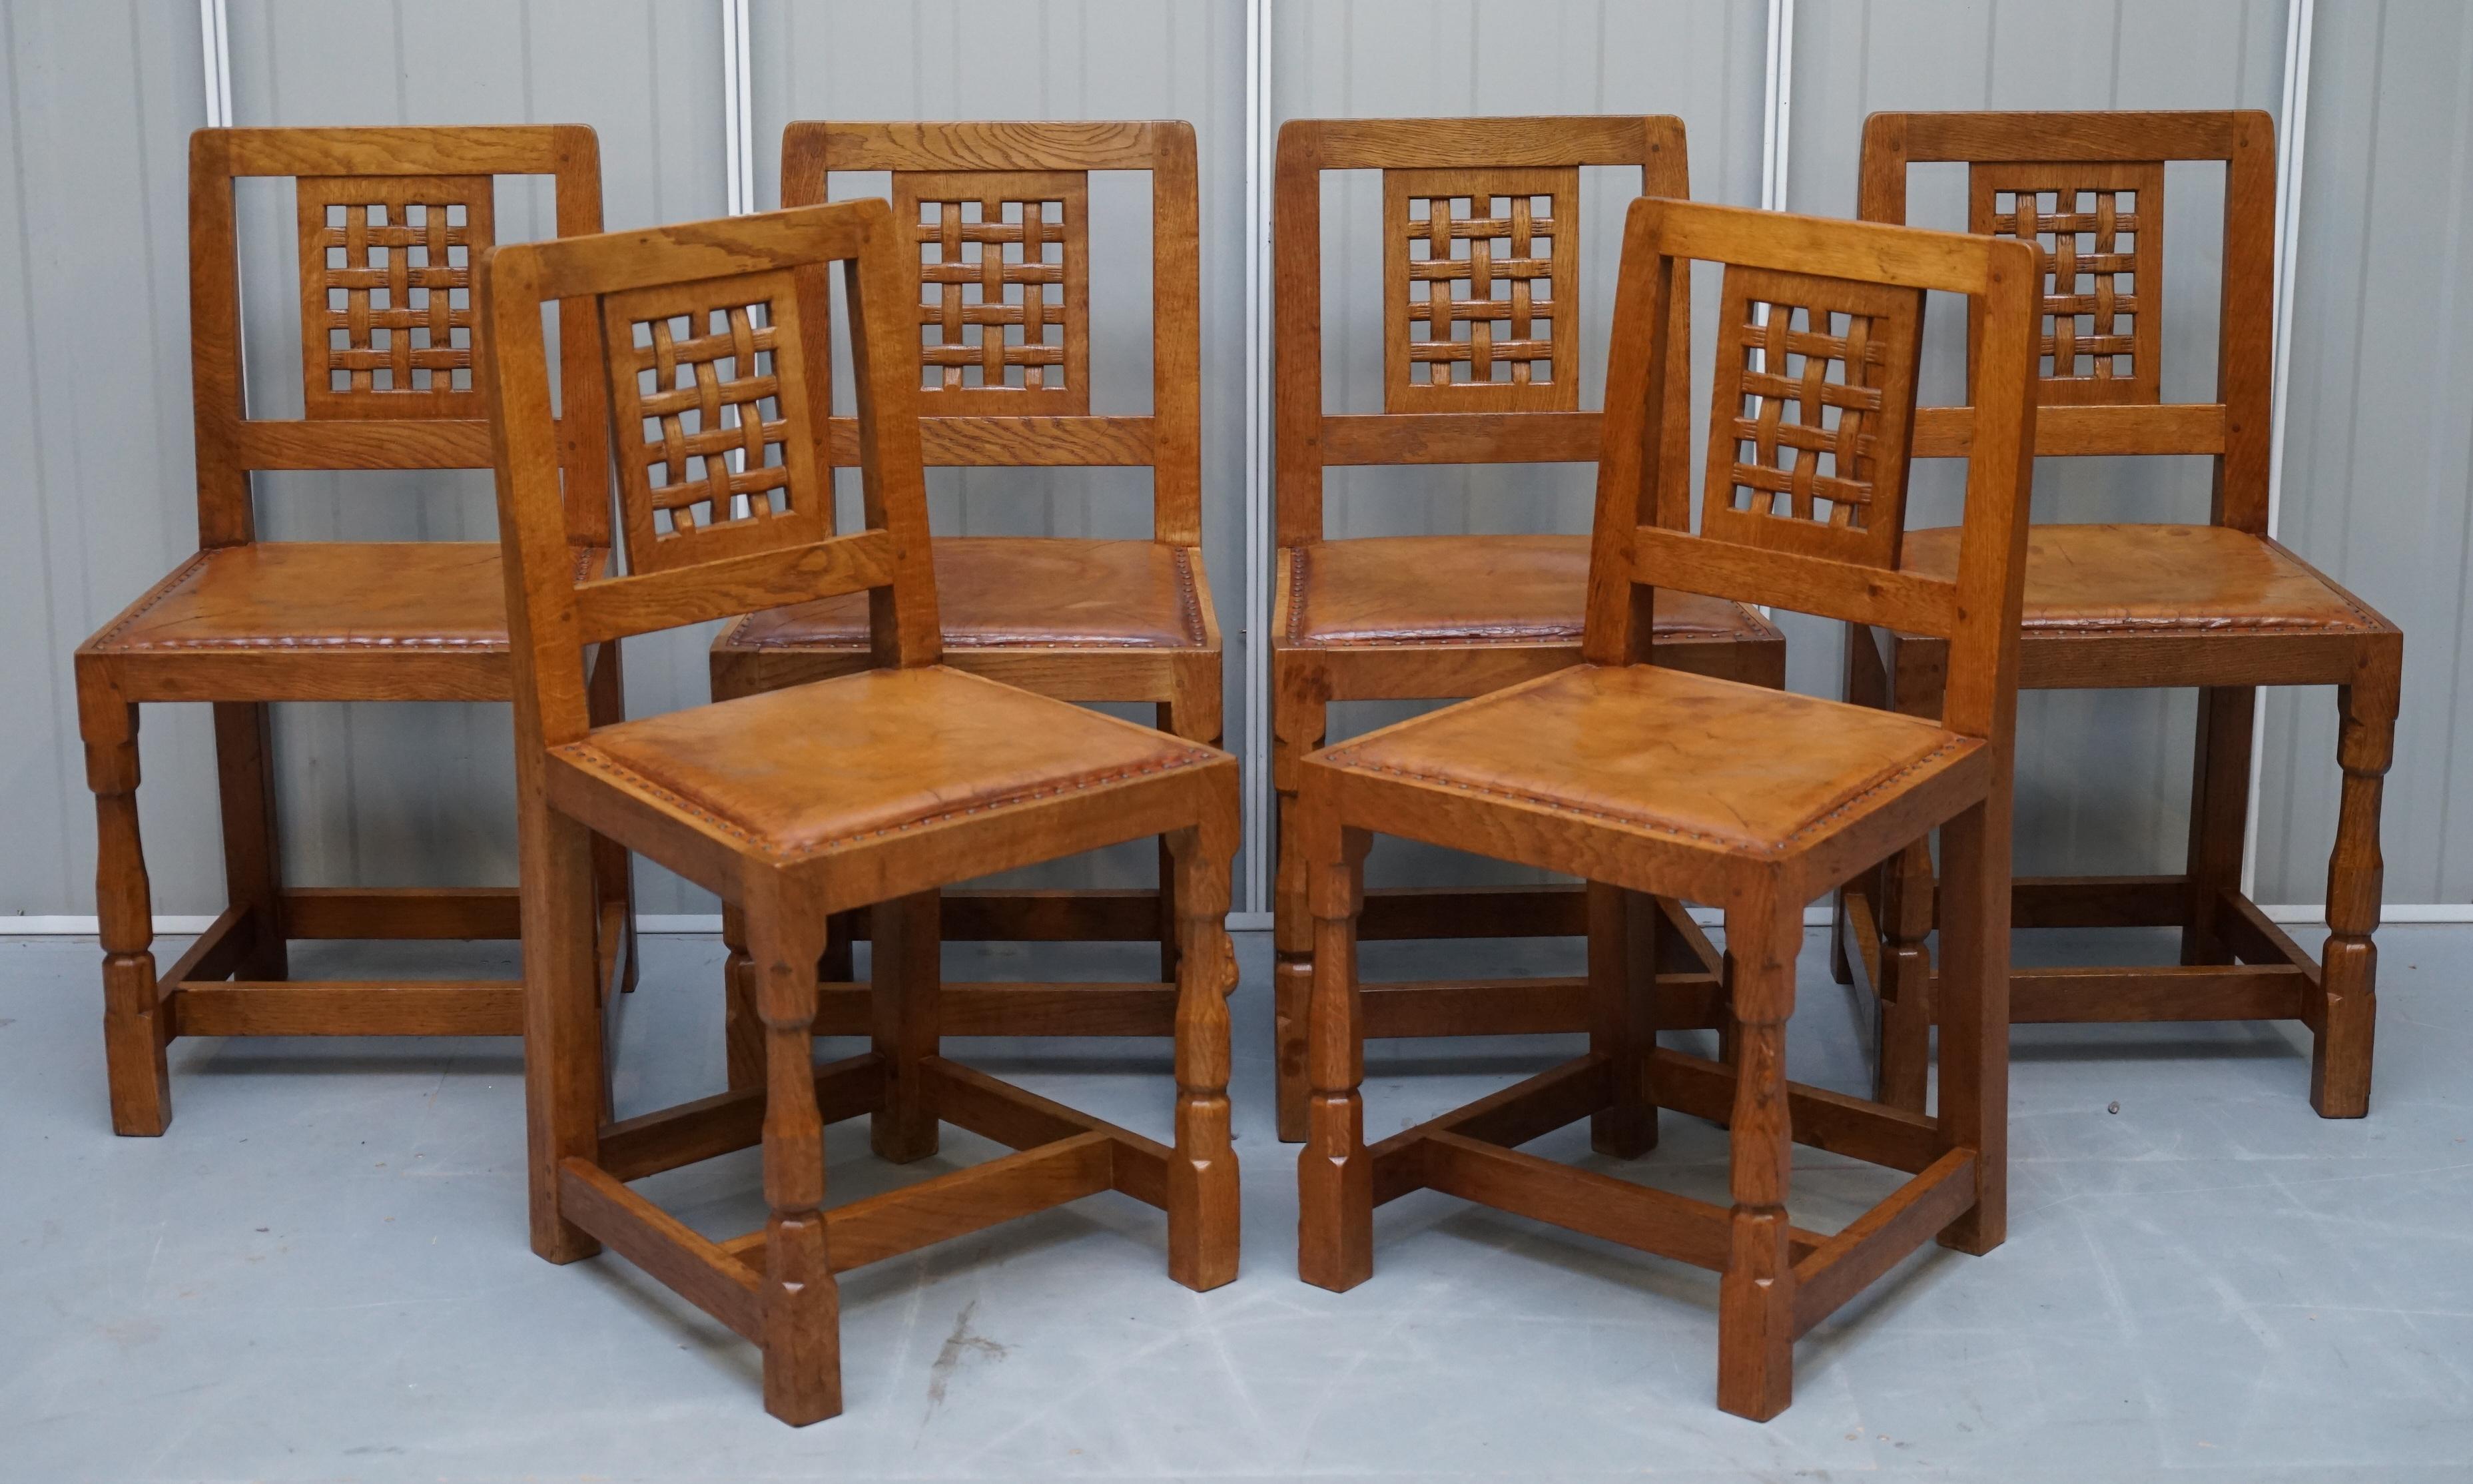 Sublime 1968 Robert Mouseman Thompson Refectory Dining Table & Eight Chairs 8 4